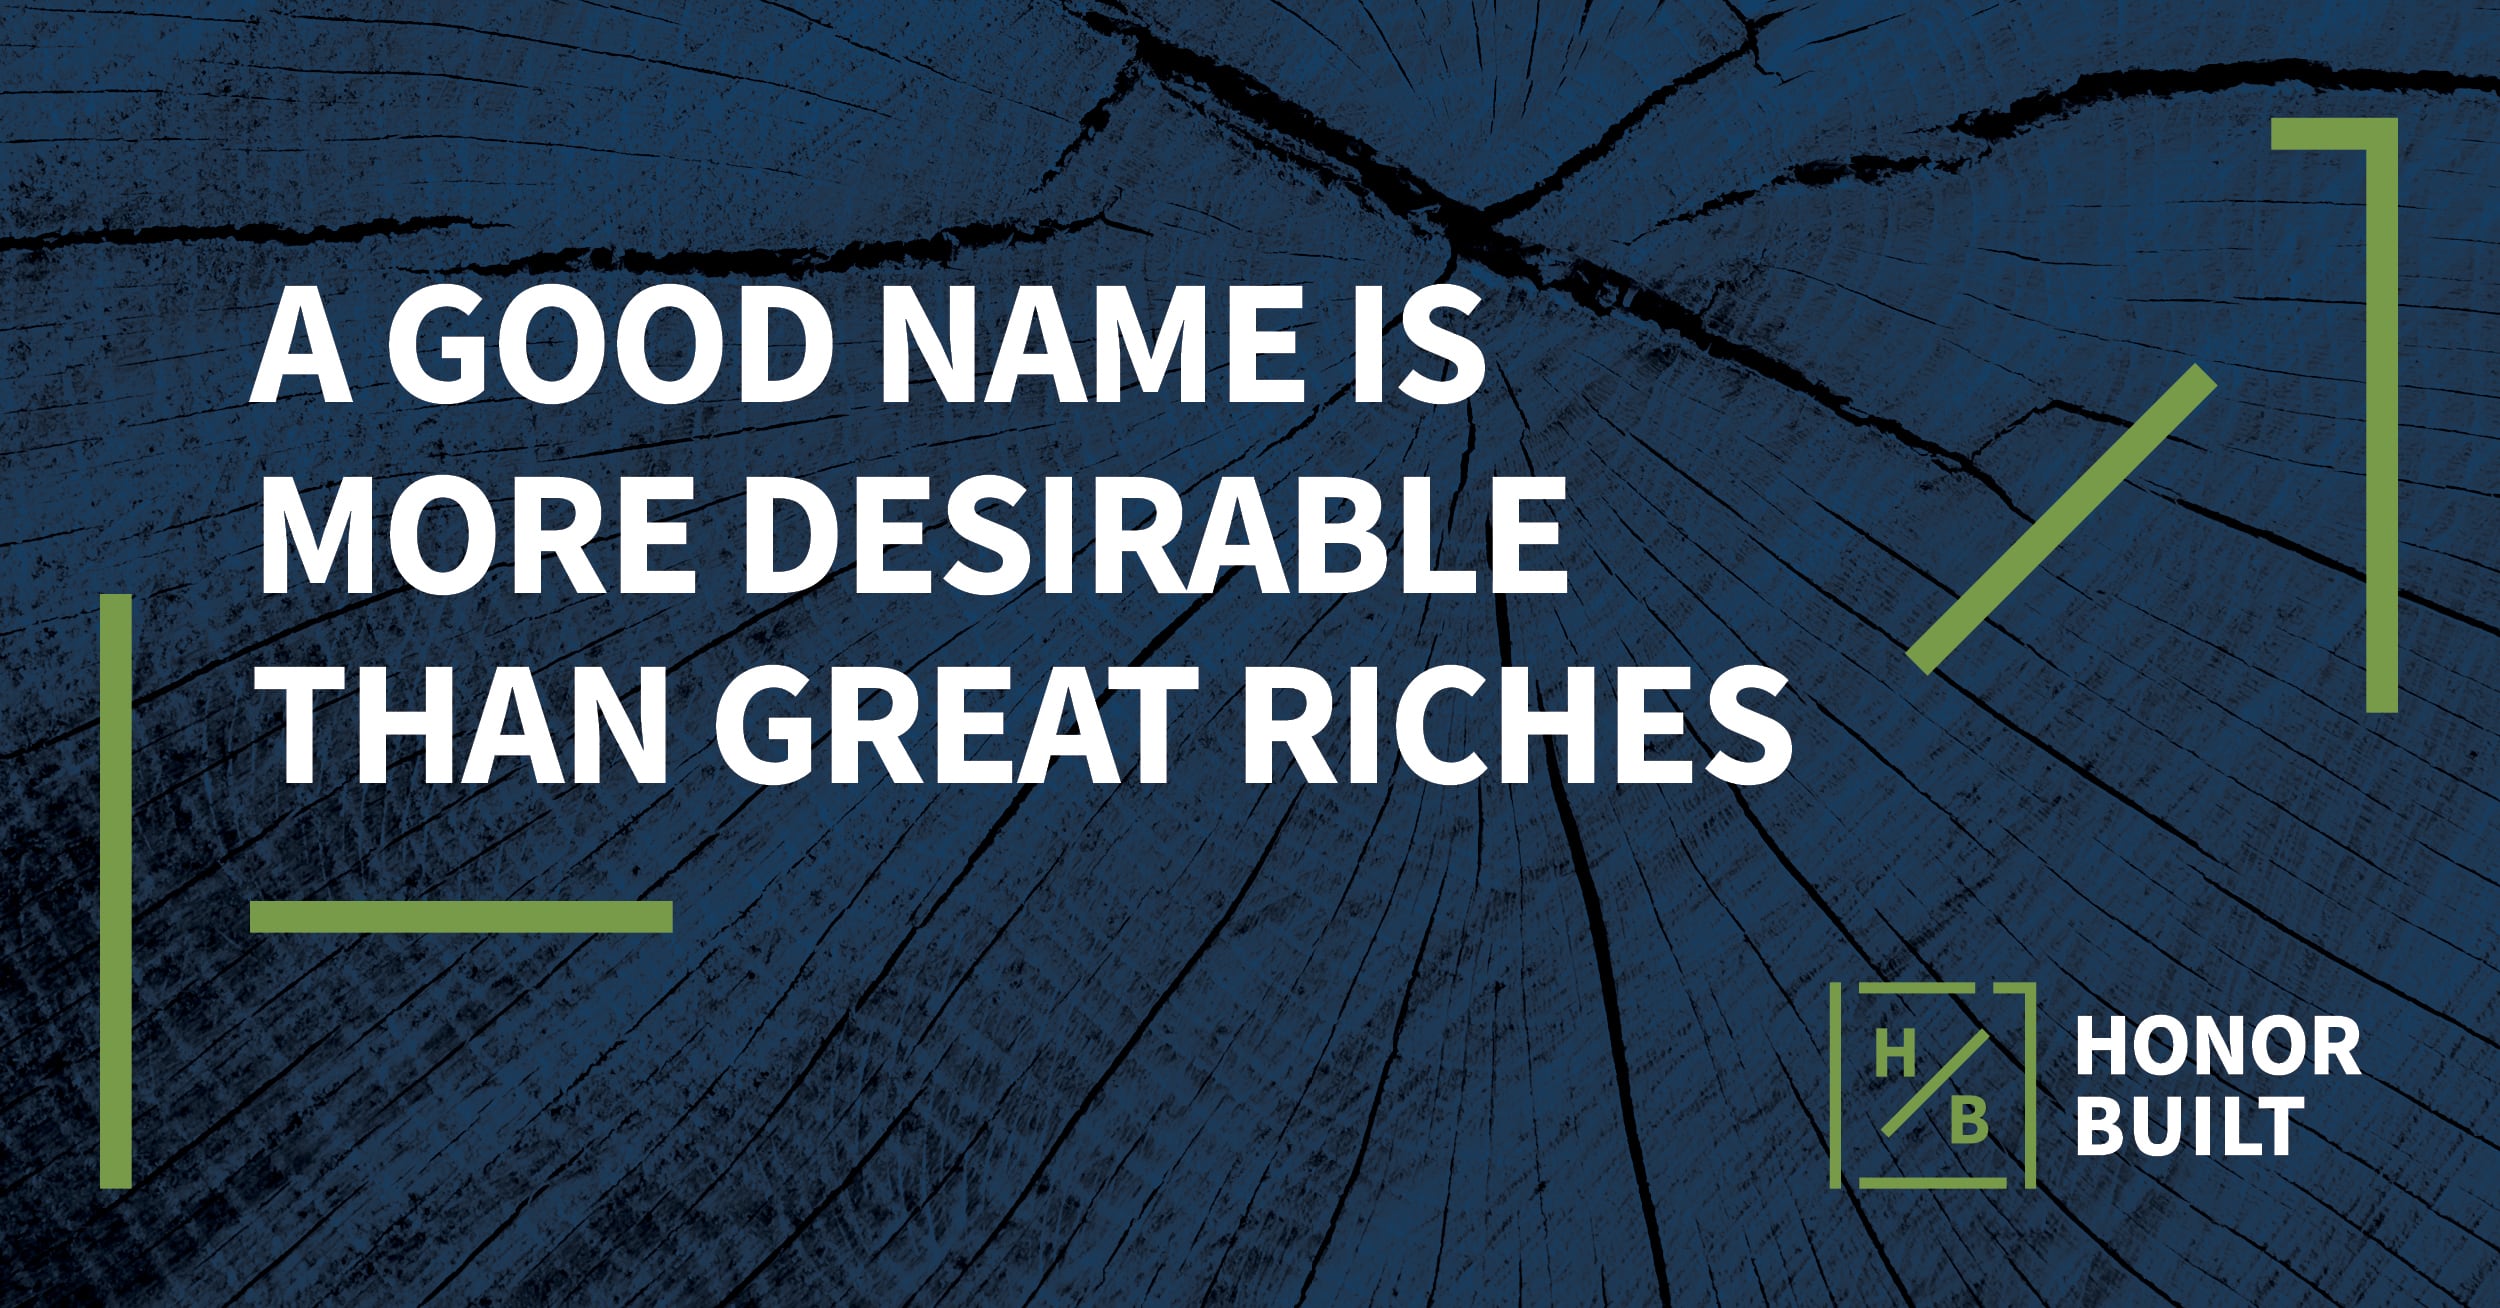 HONORISM #7: A good name is more desirable than great riches